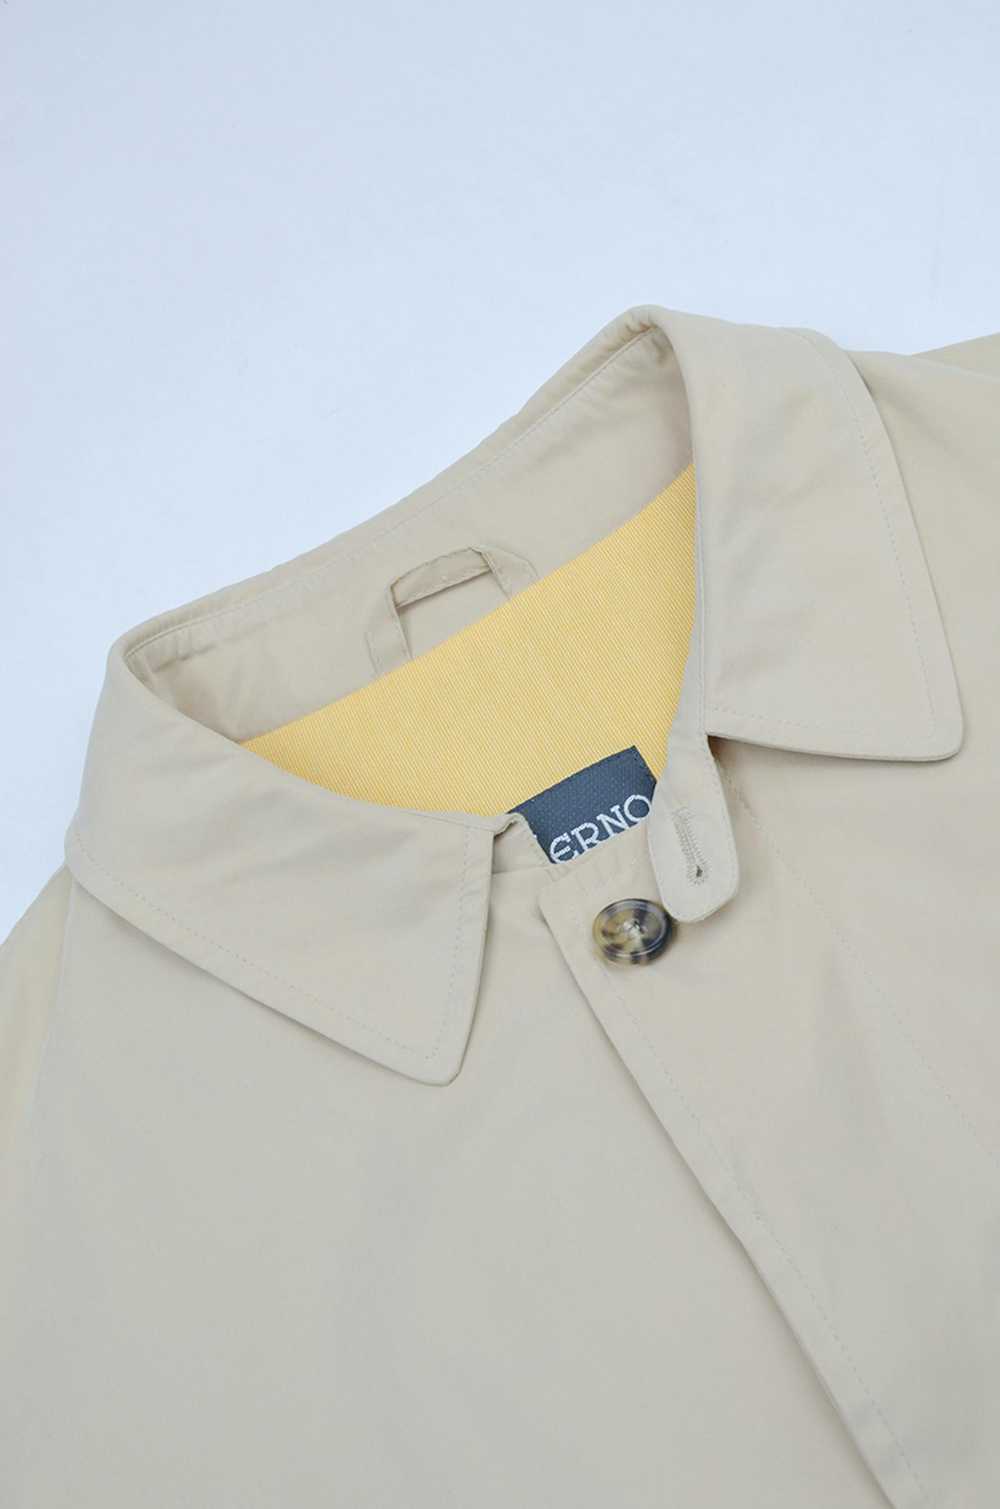 Herno HERNO Perfect Light Trench Coat - image 5